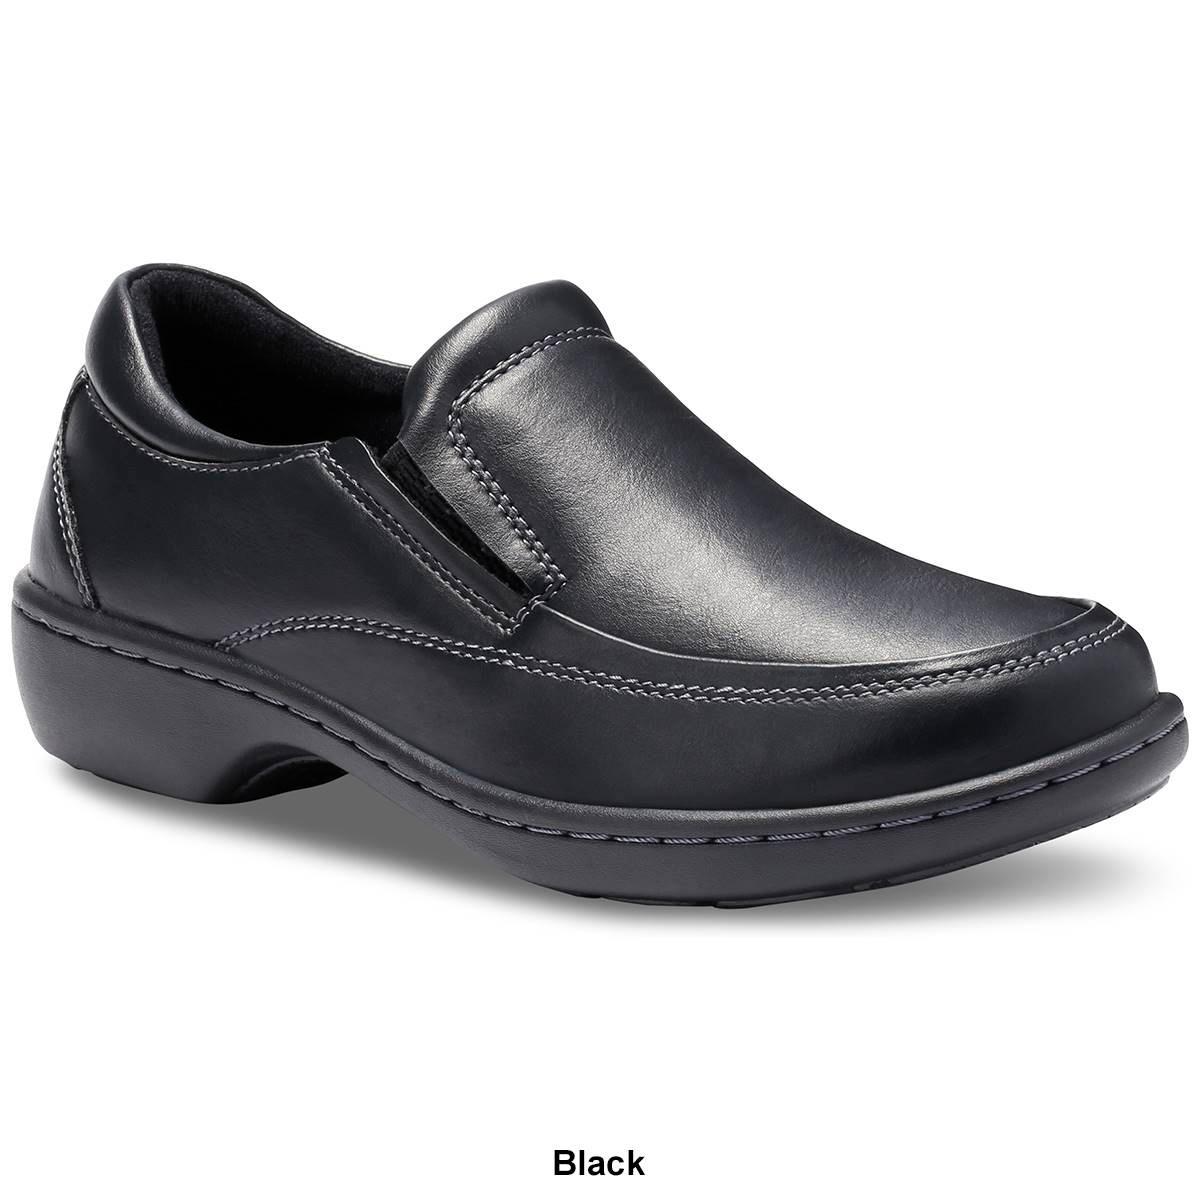 Eastland Molly Womens Loafers Black Product Image